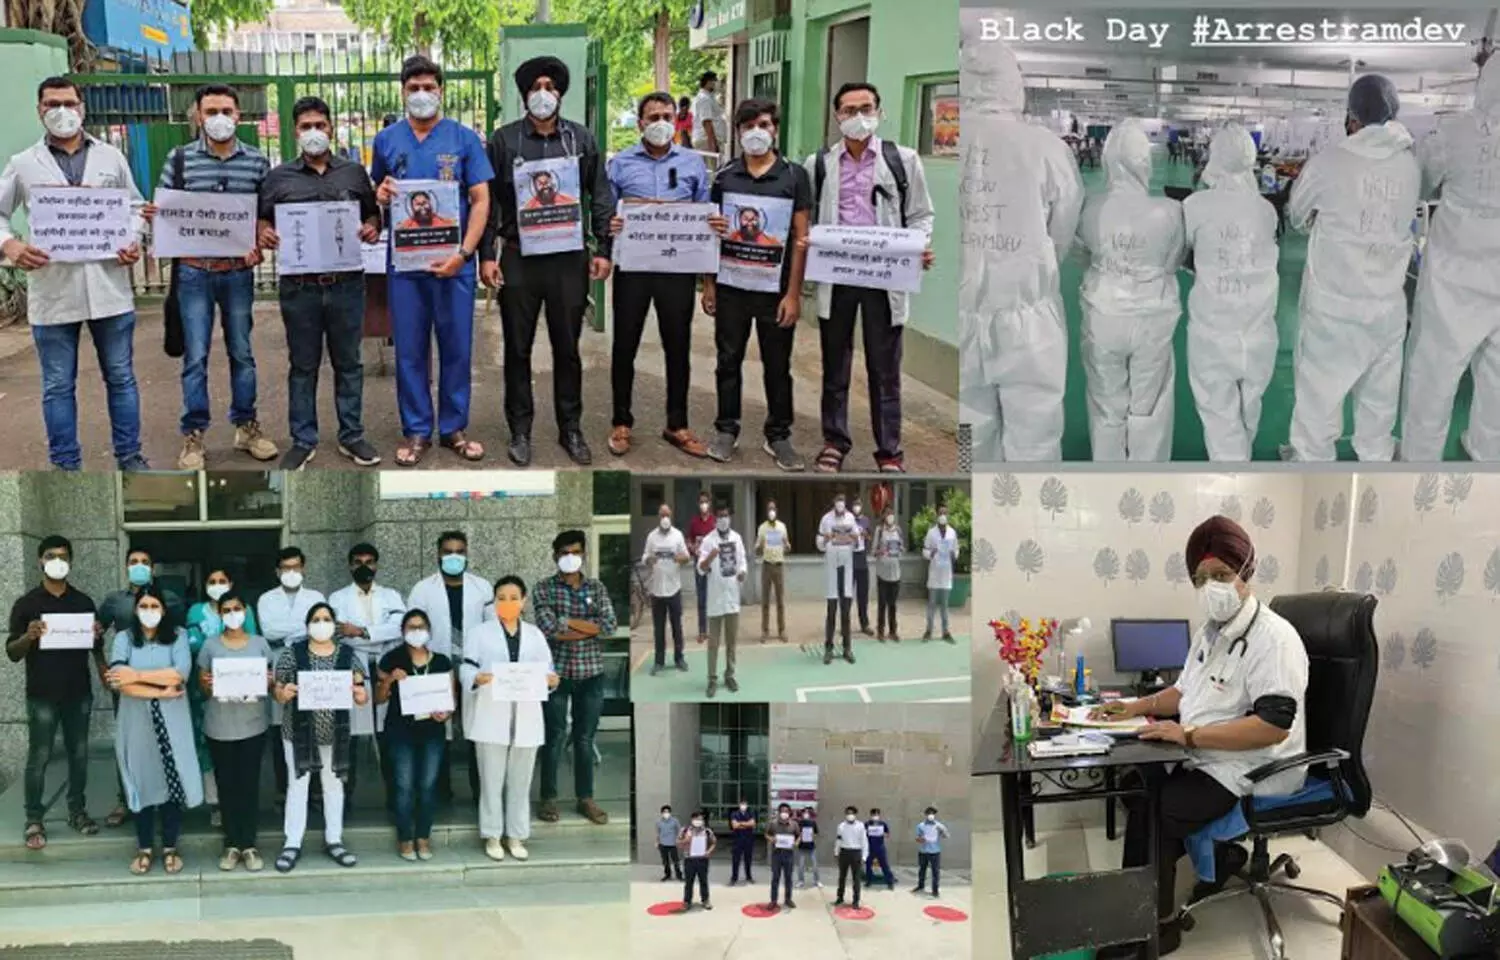 Opposing mockery of allopathy, Doctors across country observe Black Band protest